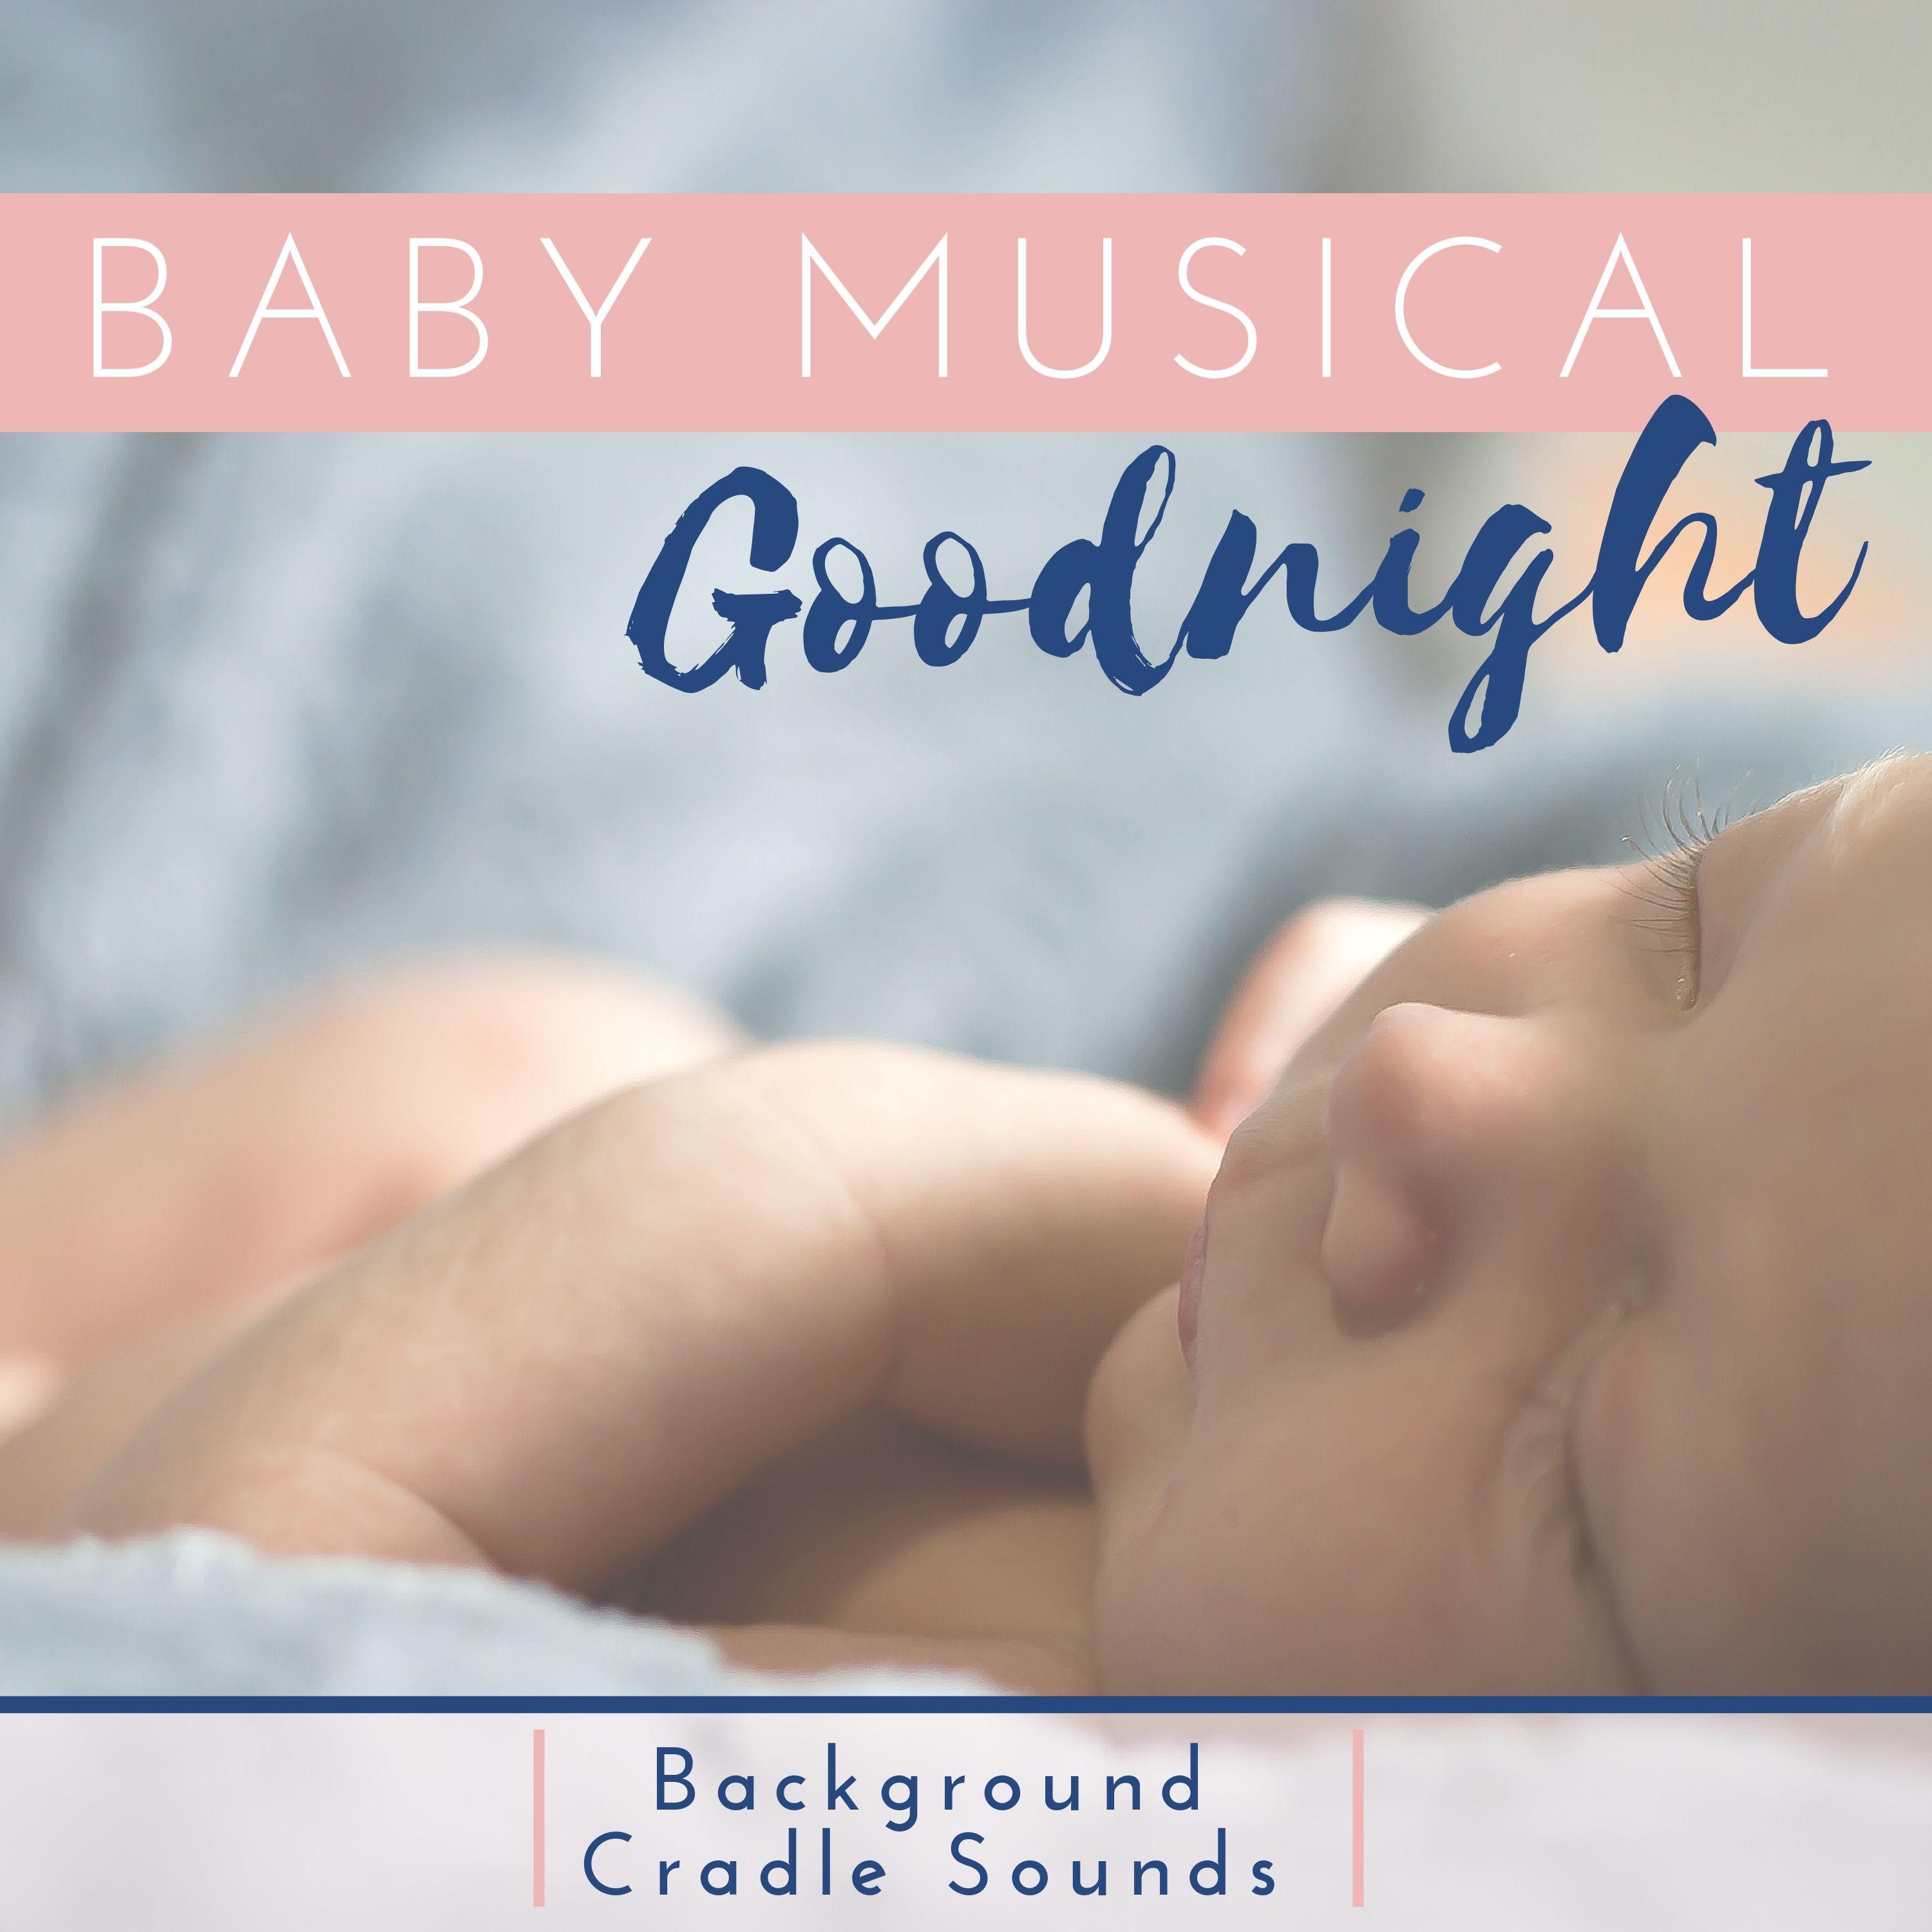 Baby Musical Goodnight - Background Cradle Sounds